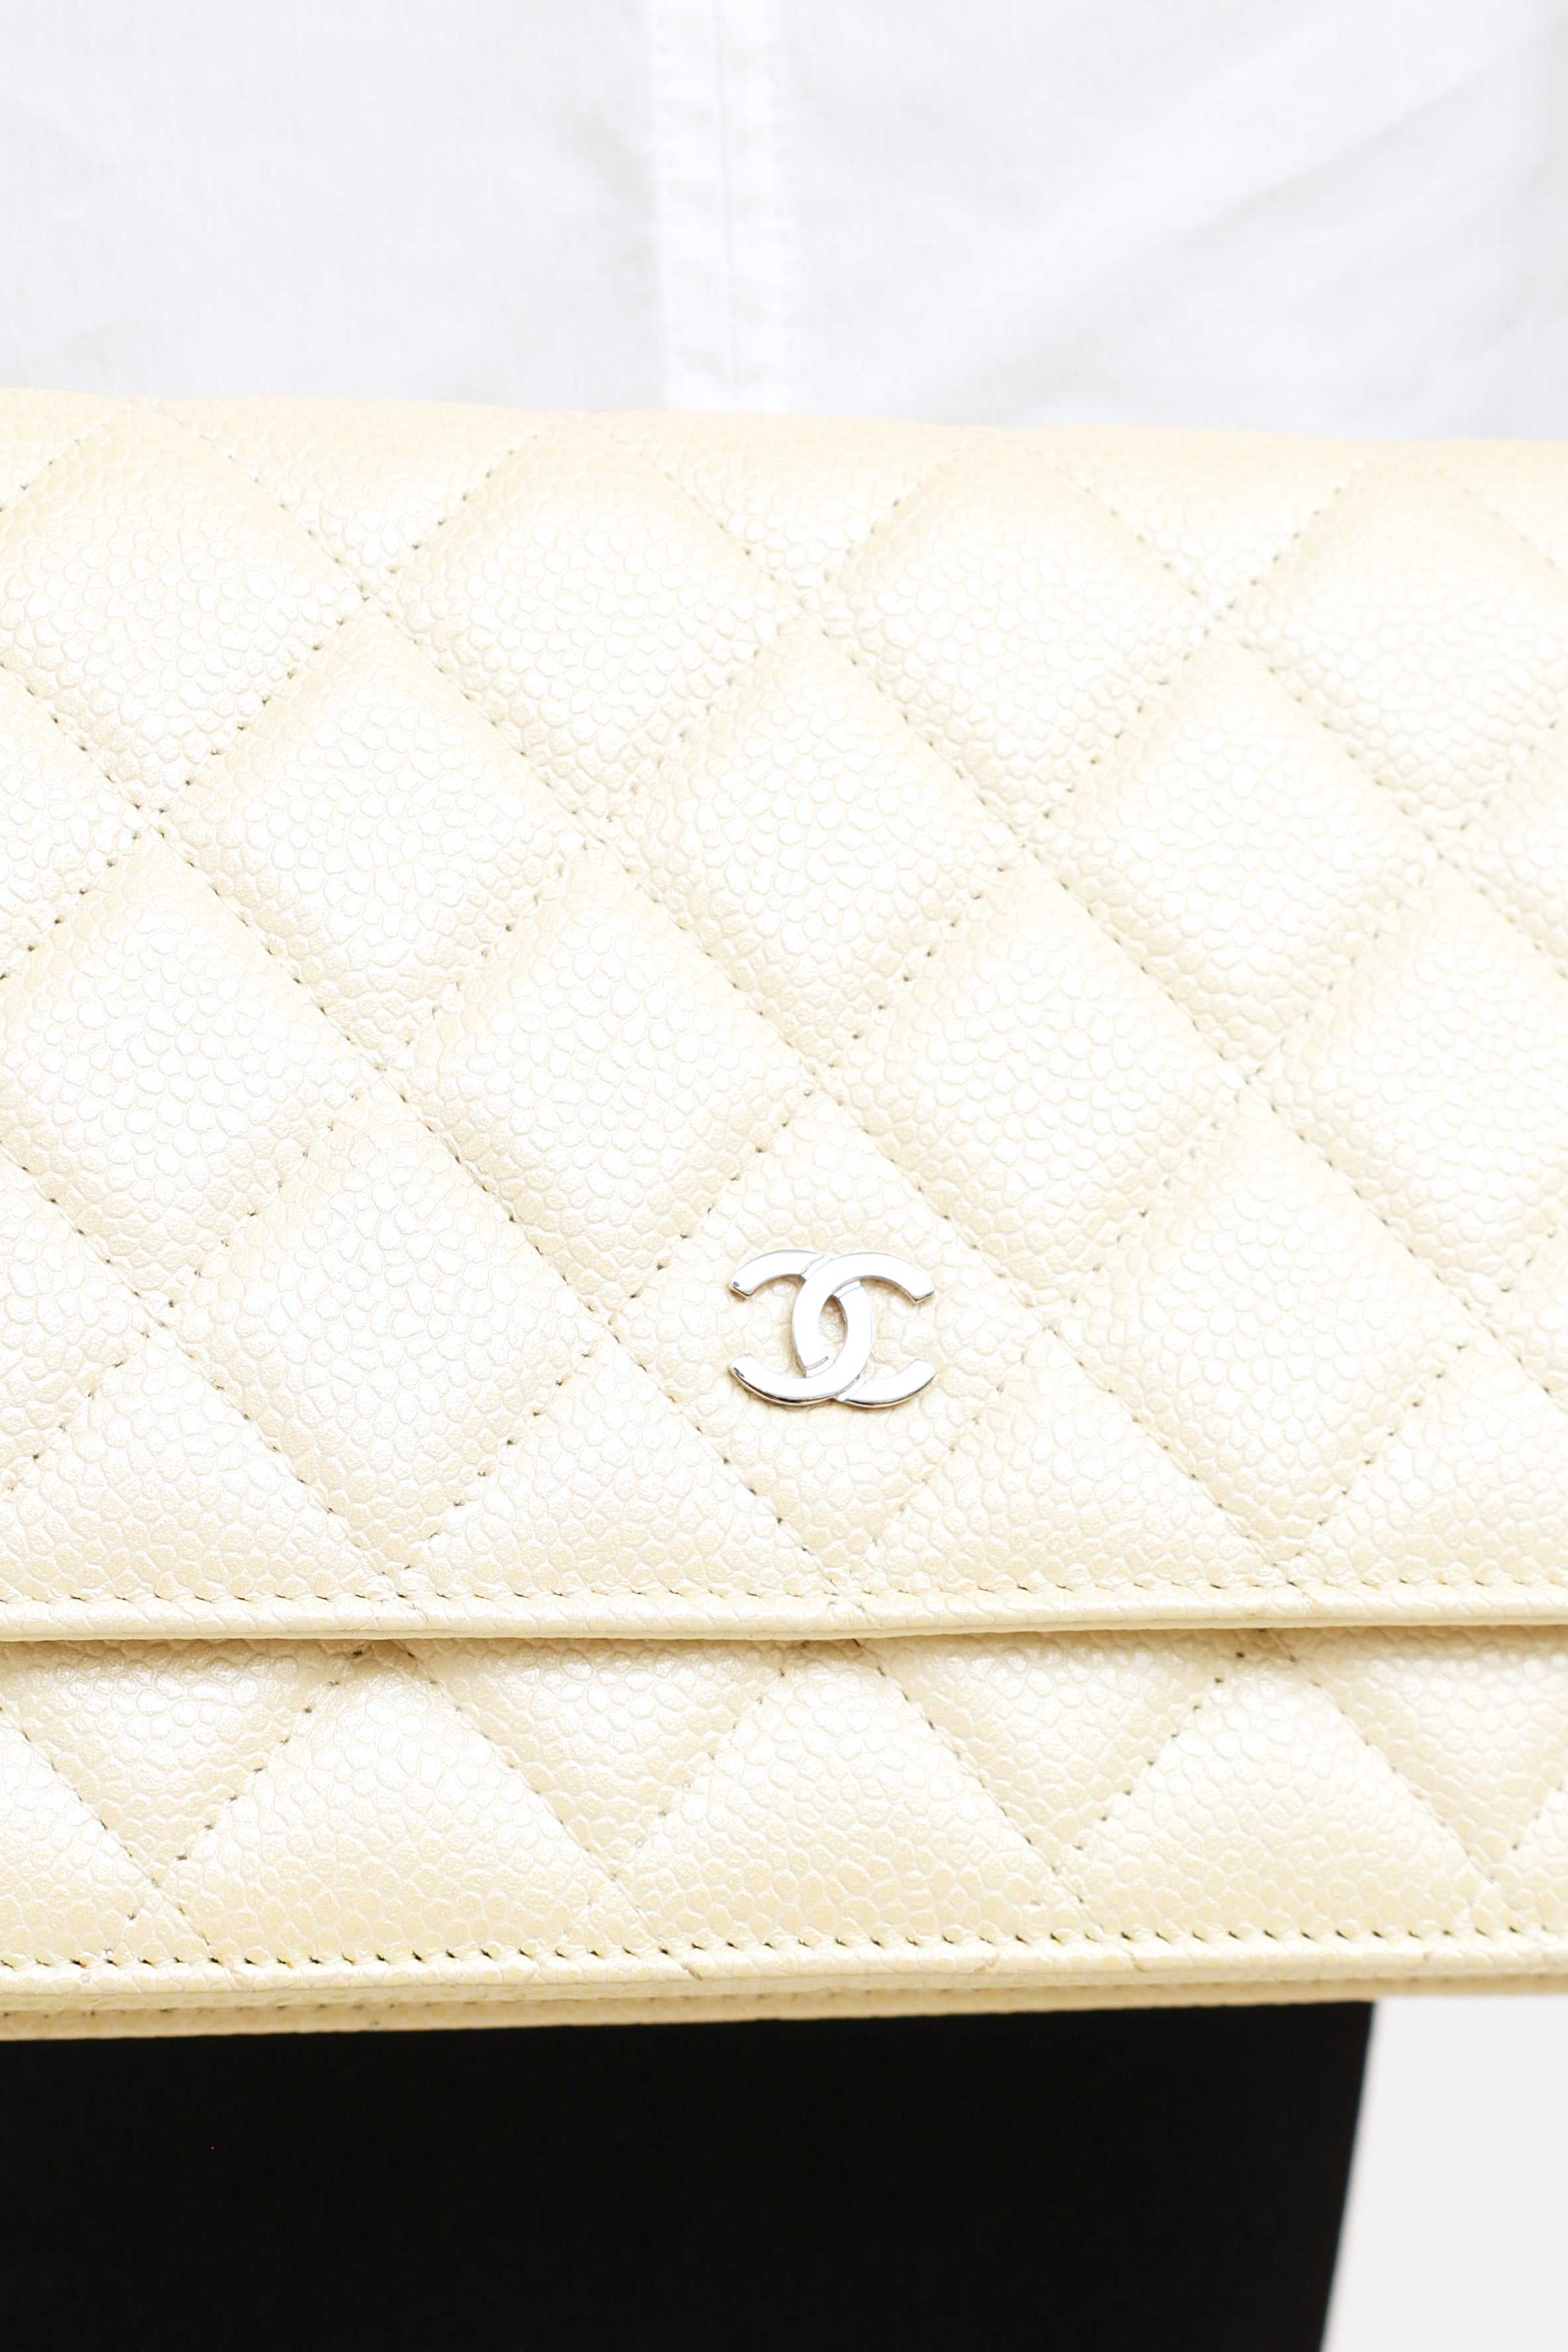 50 Shades of Beige: The Chanel Caviar Flap - Academy by FASHIONPHILE